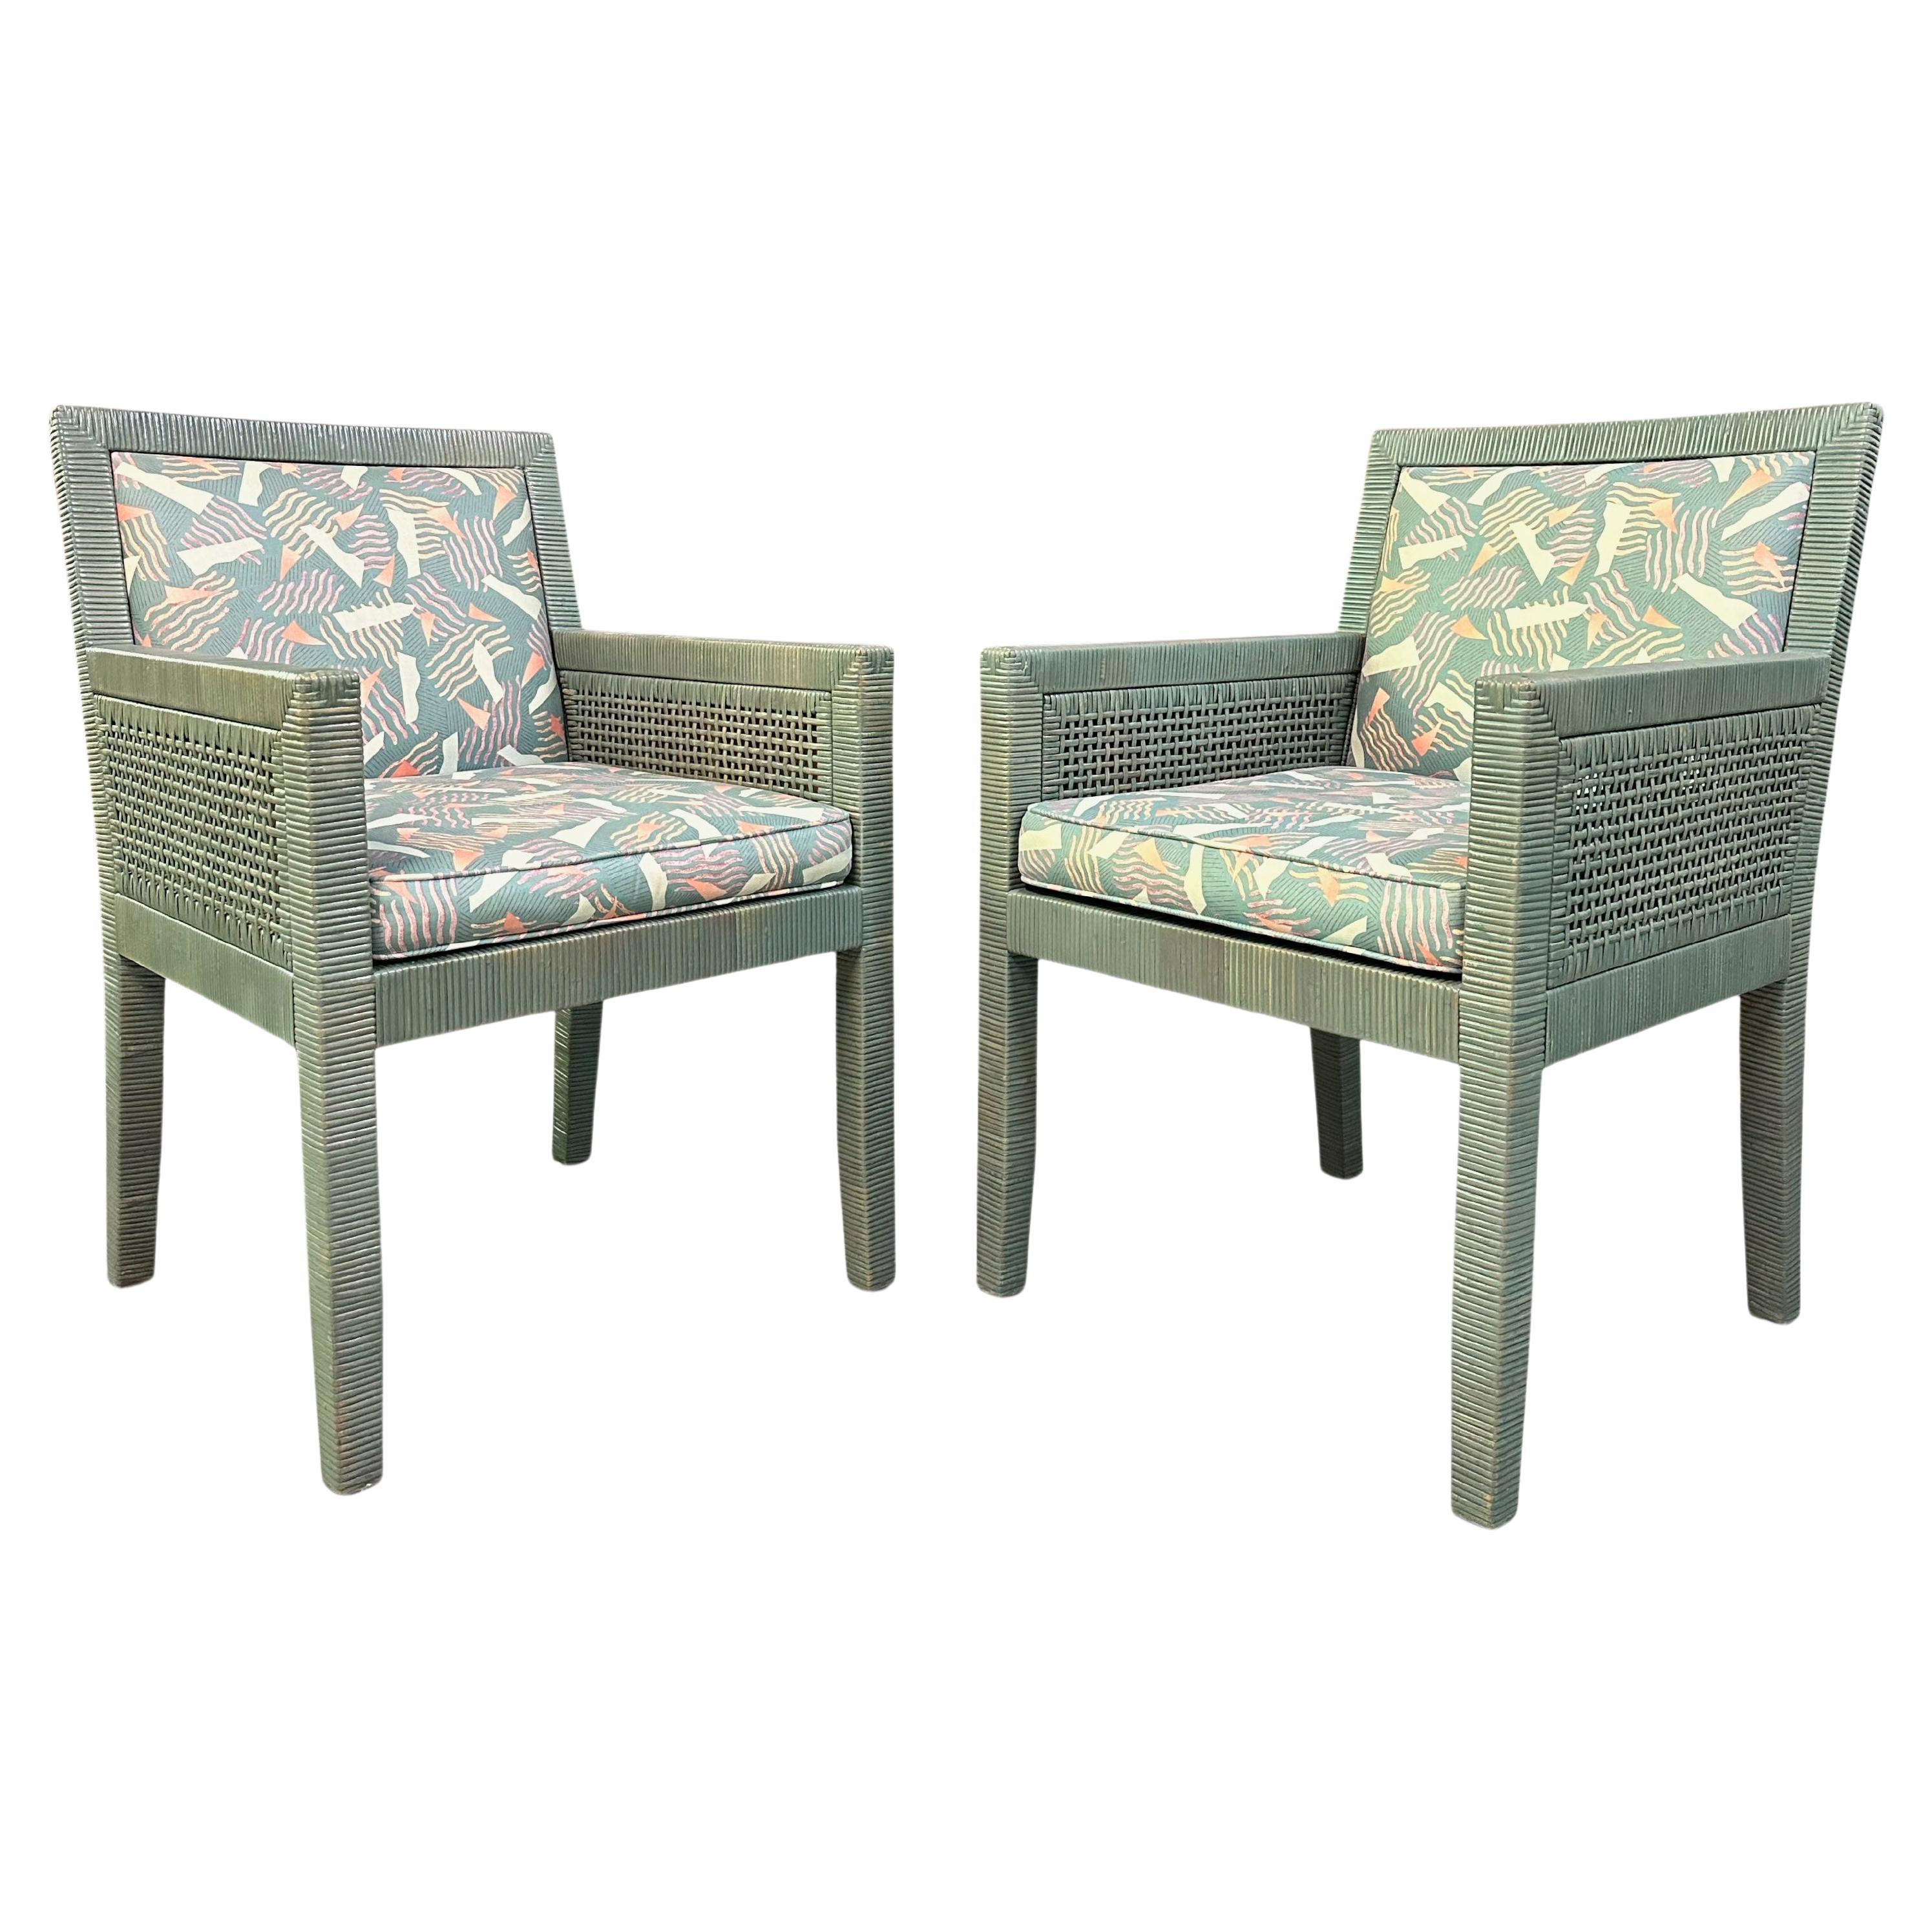 Bielecky Brothers Exquisite Set of Eight Rattan Dining Chairs by Billy Baldwin  